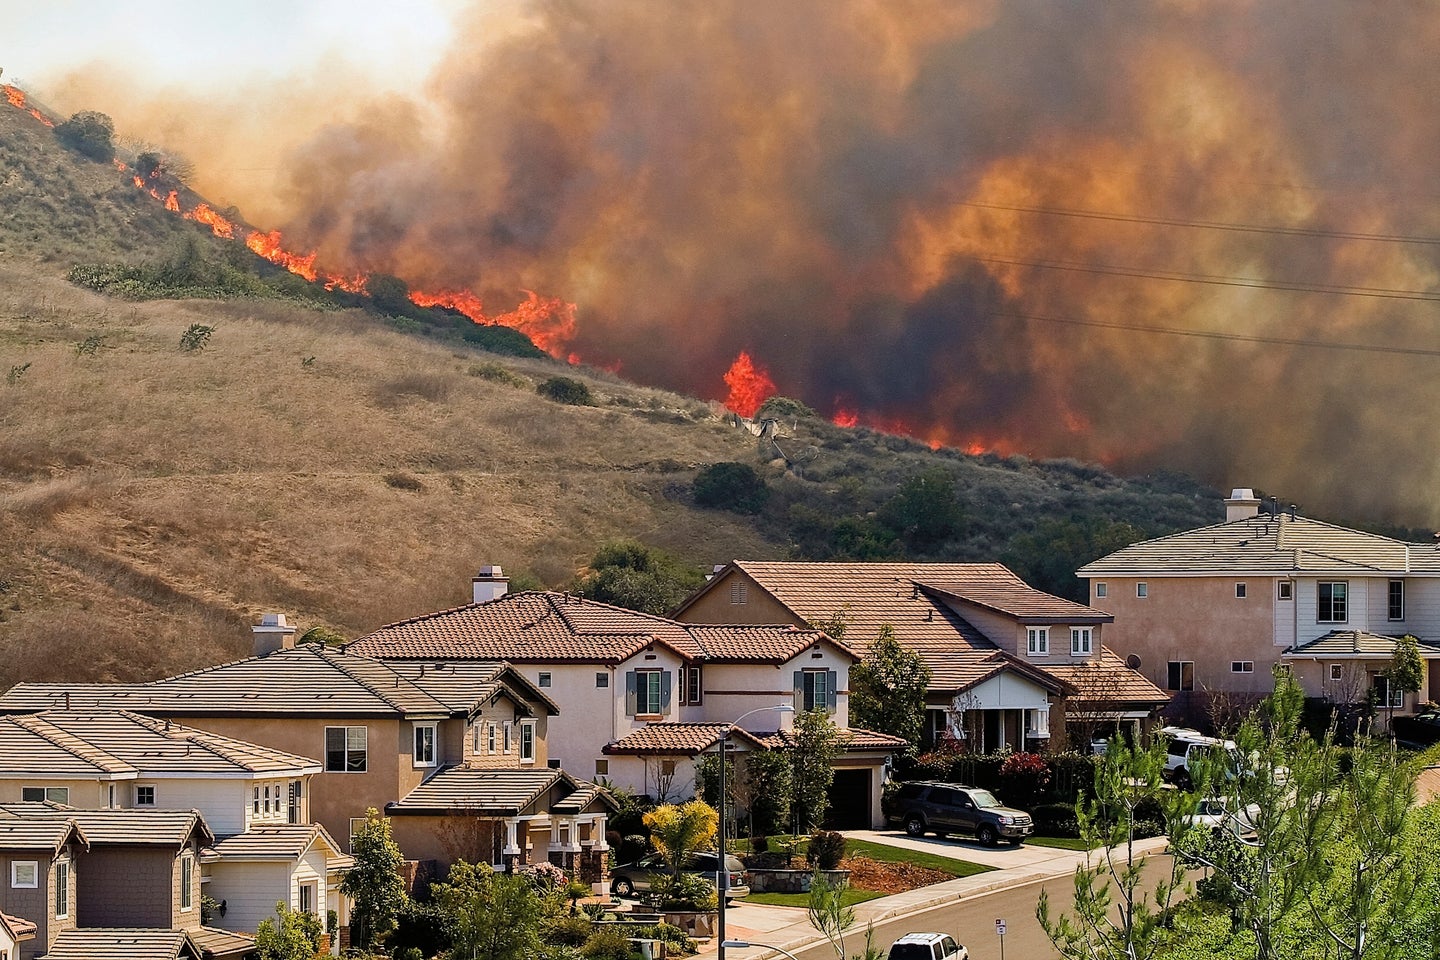 A row of suburban houses with a hill behind and an approaching wildfire over the California hills